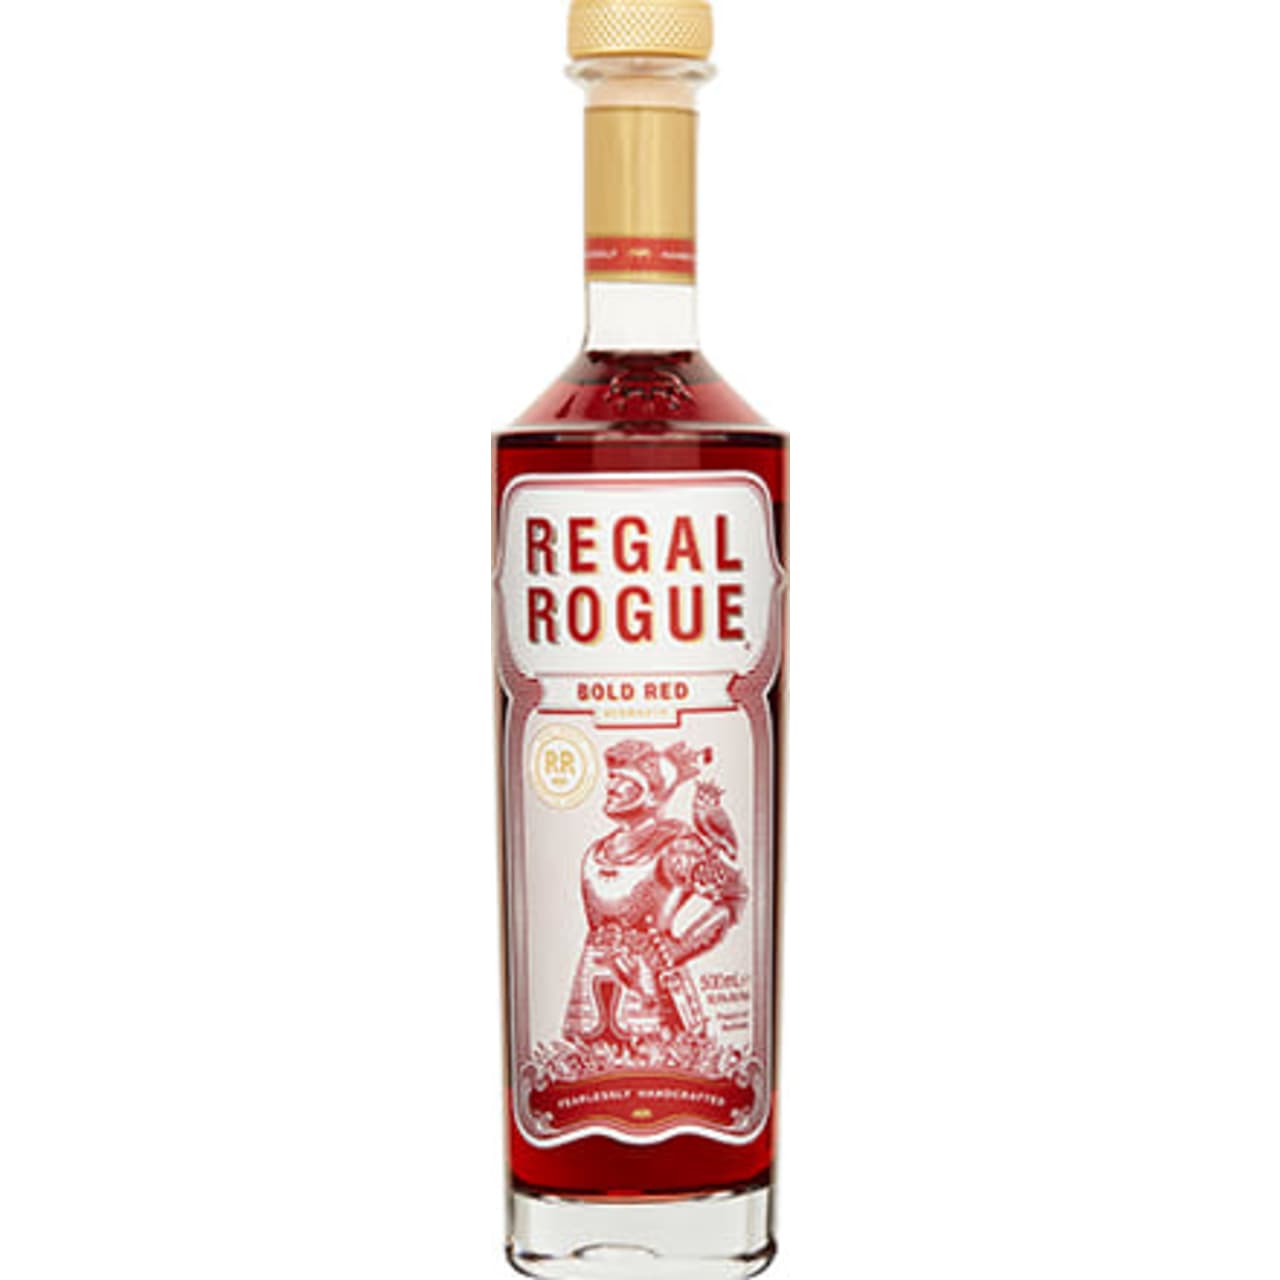 Regal Rogue Bold Red is one of the world’s first dry Red vermouths, led by aromatic spice and rich dried fruit.